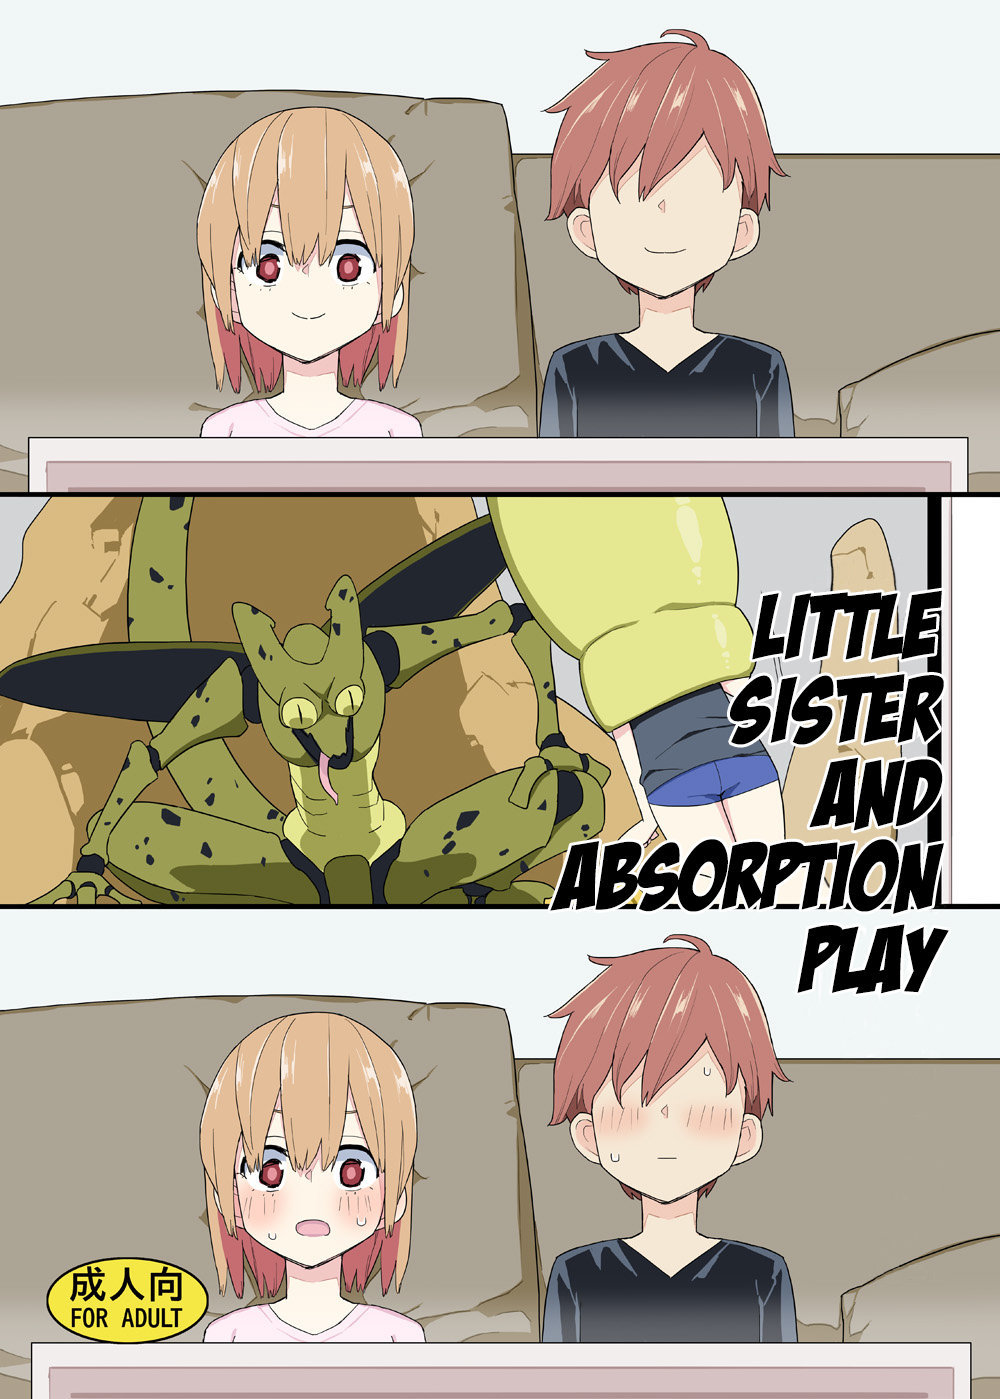 Little Sister and Absorption Play - 0